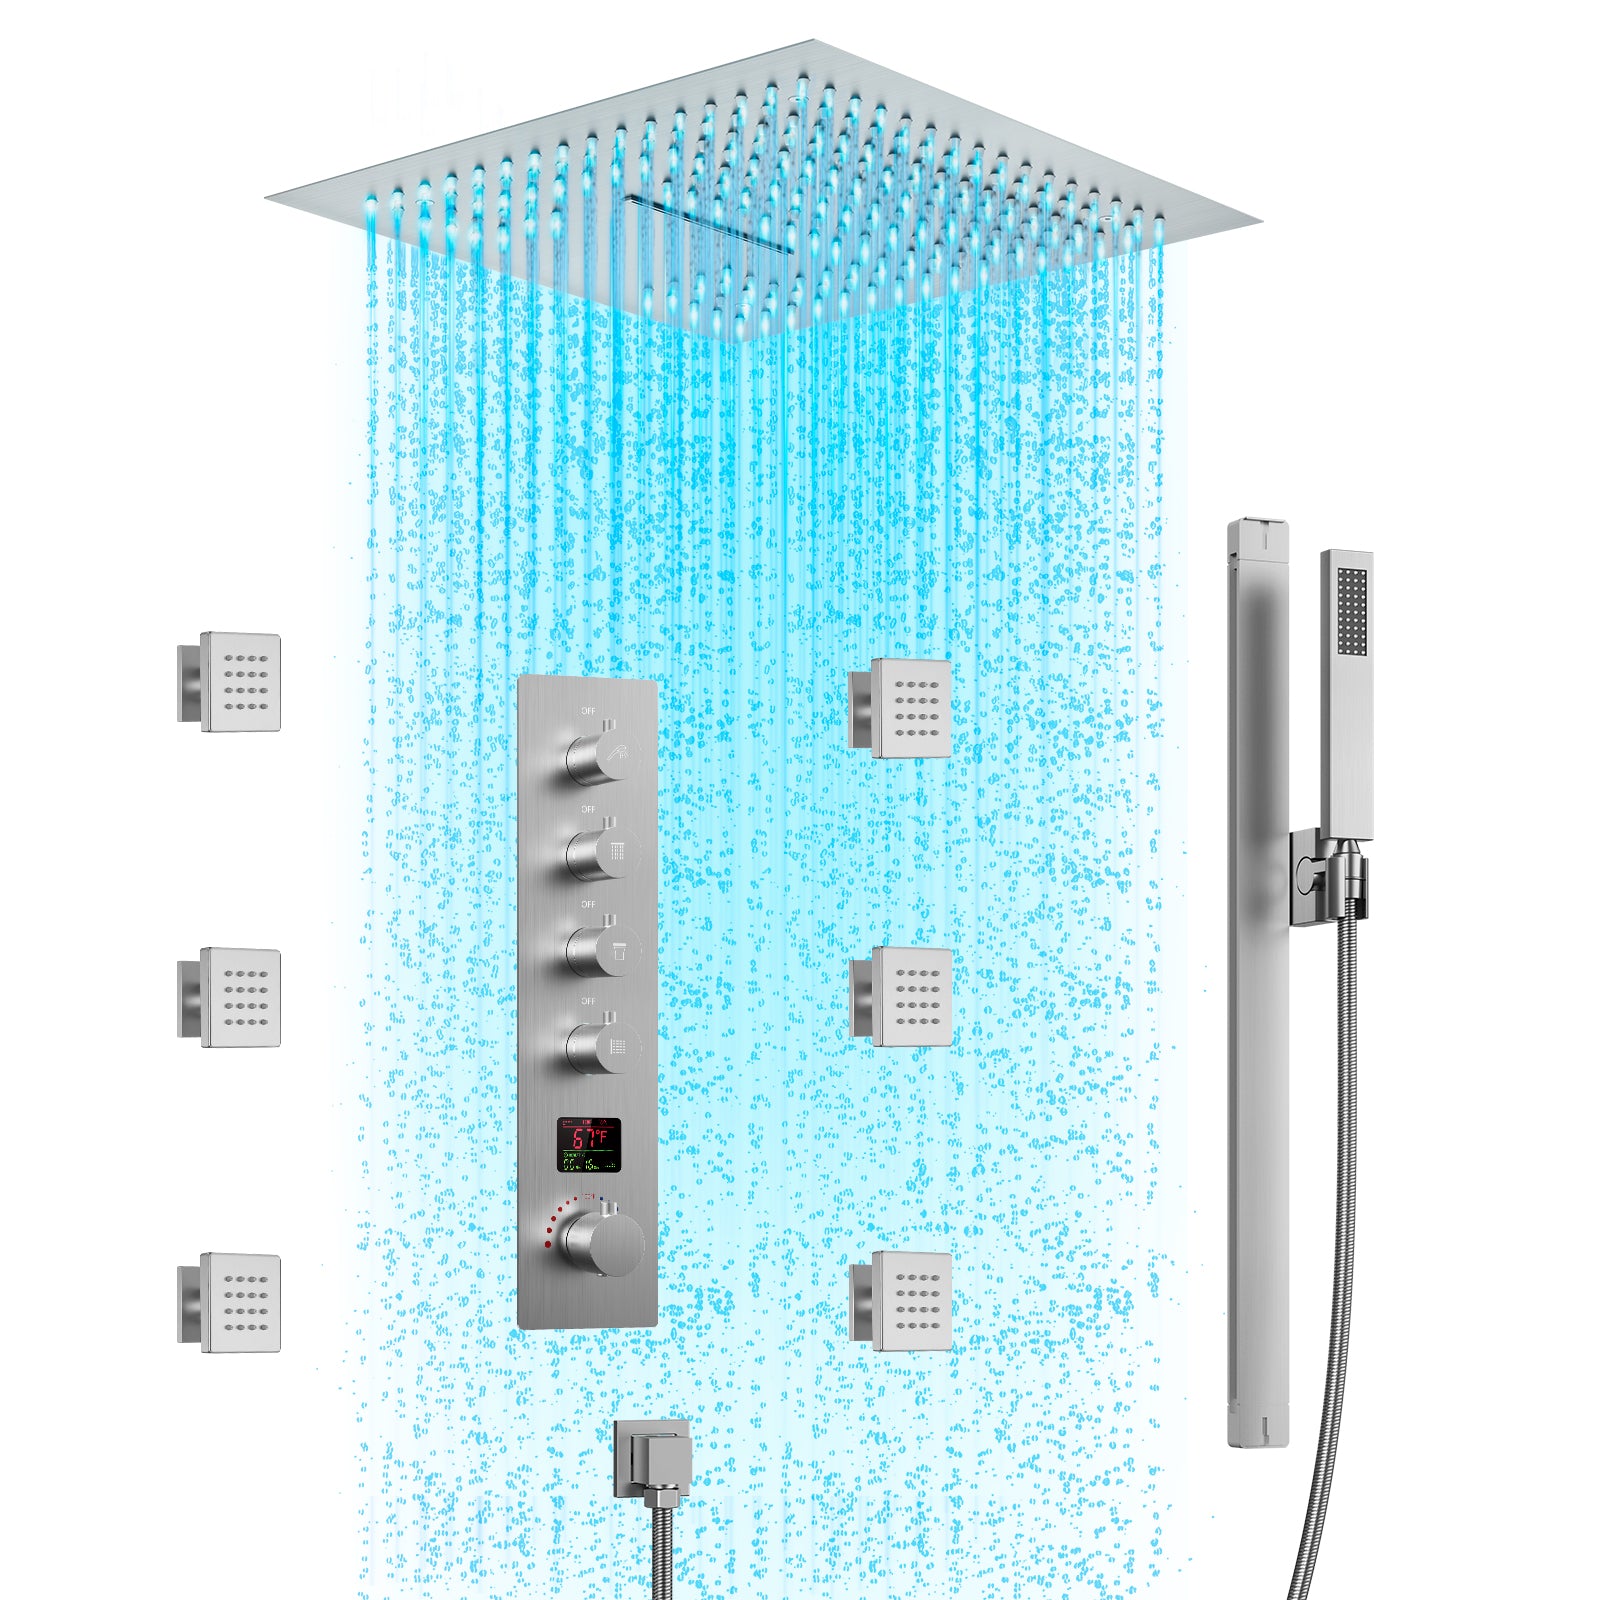 SFS-1027-NK16 EVERSTEIN LED Thermostatic Shower Head System with Rough-in Valve in Brushed Nickel